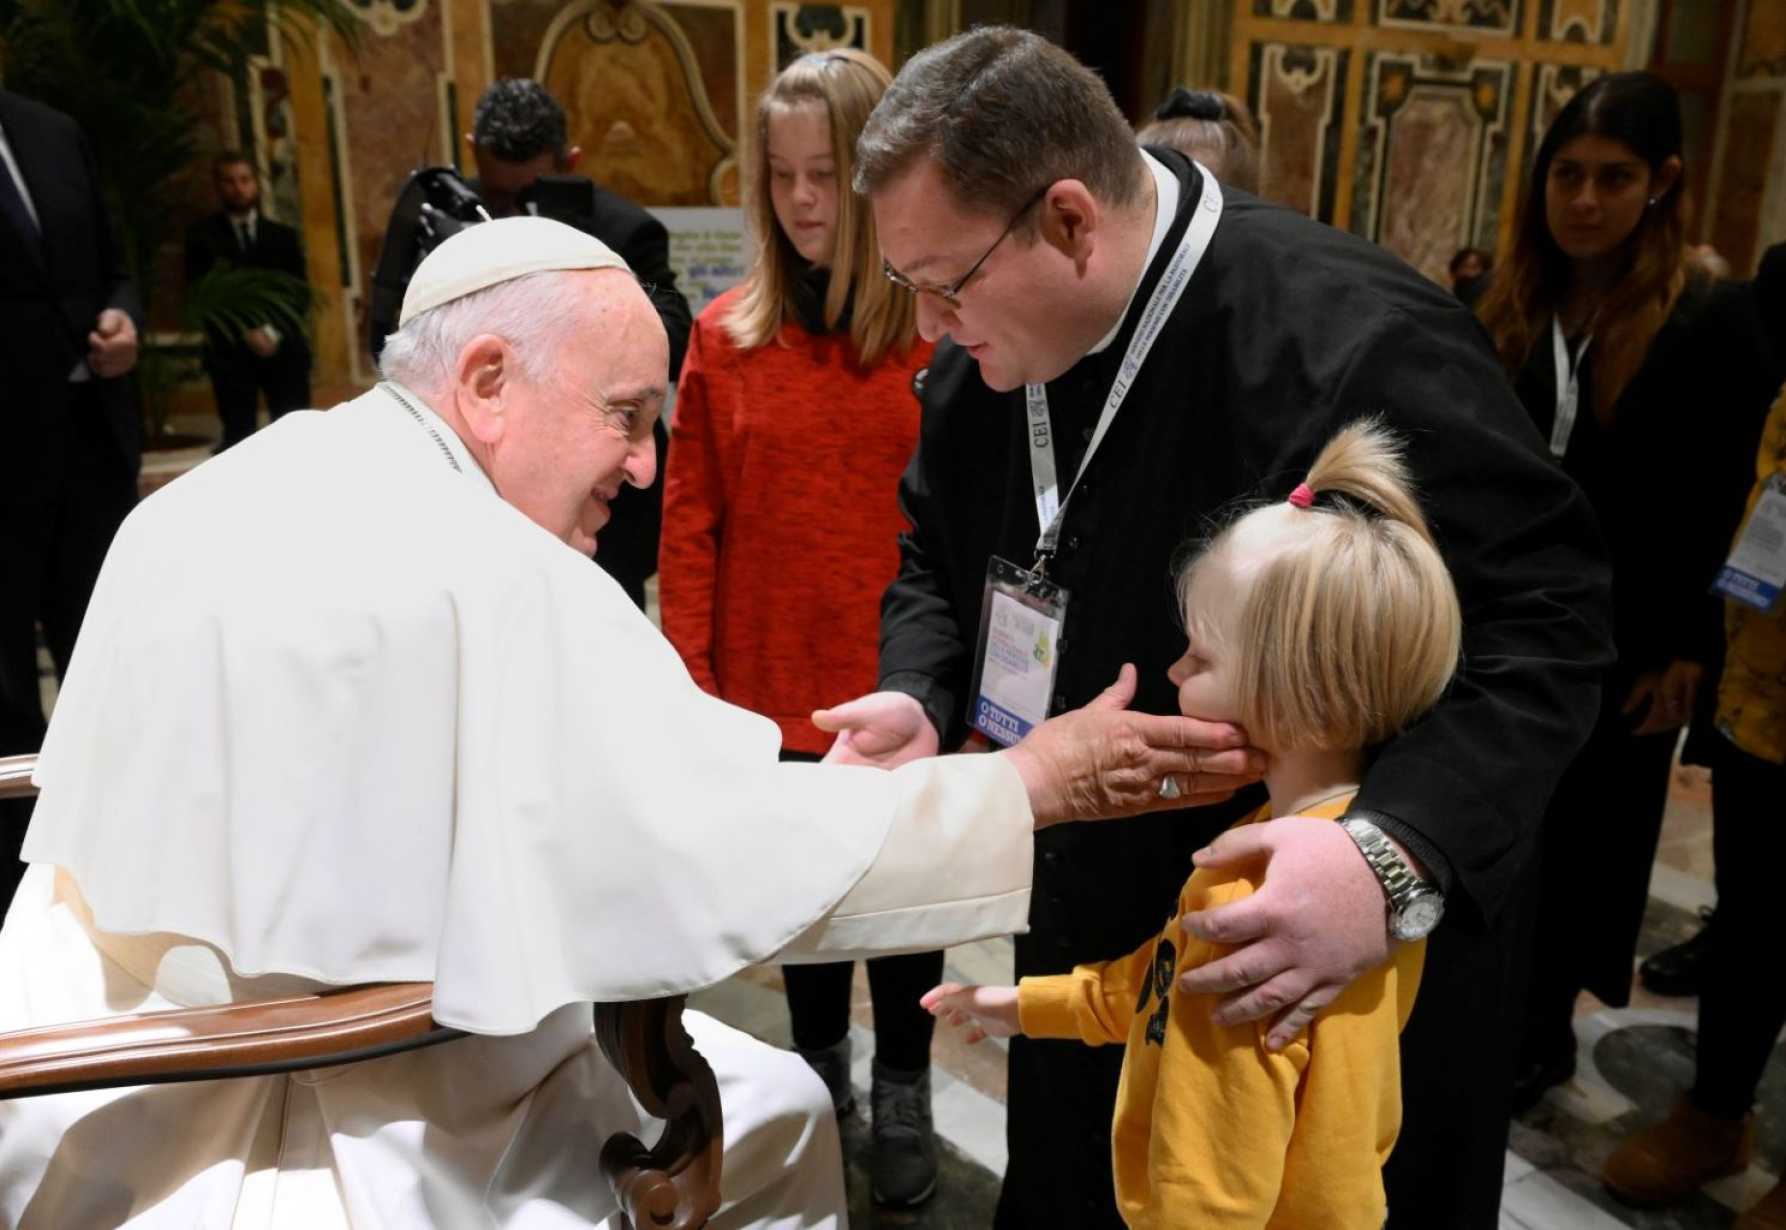 Being 'inclusive' of those with disabilities means valuing them, pope says